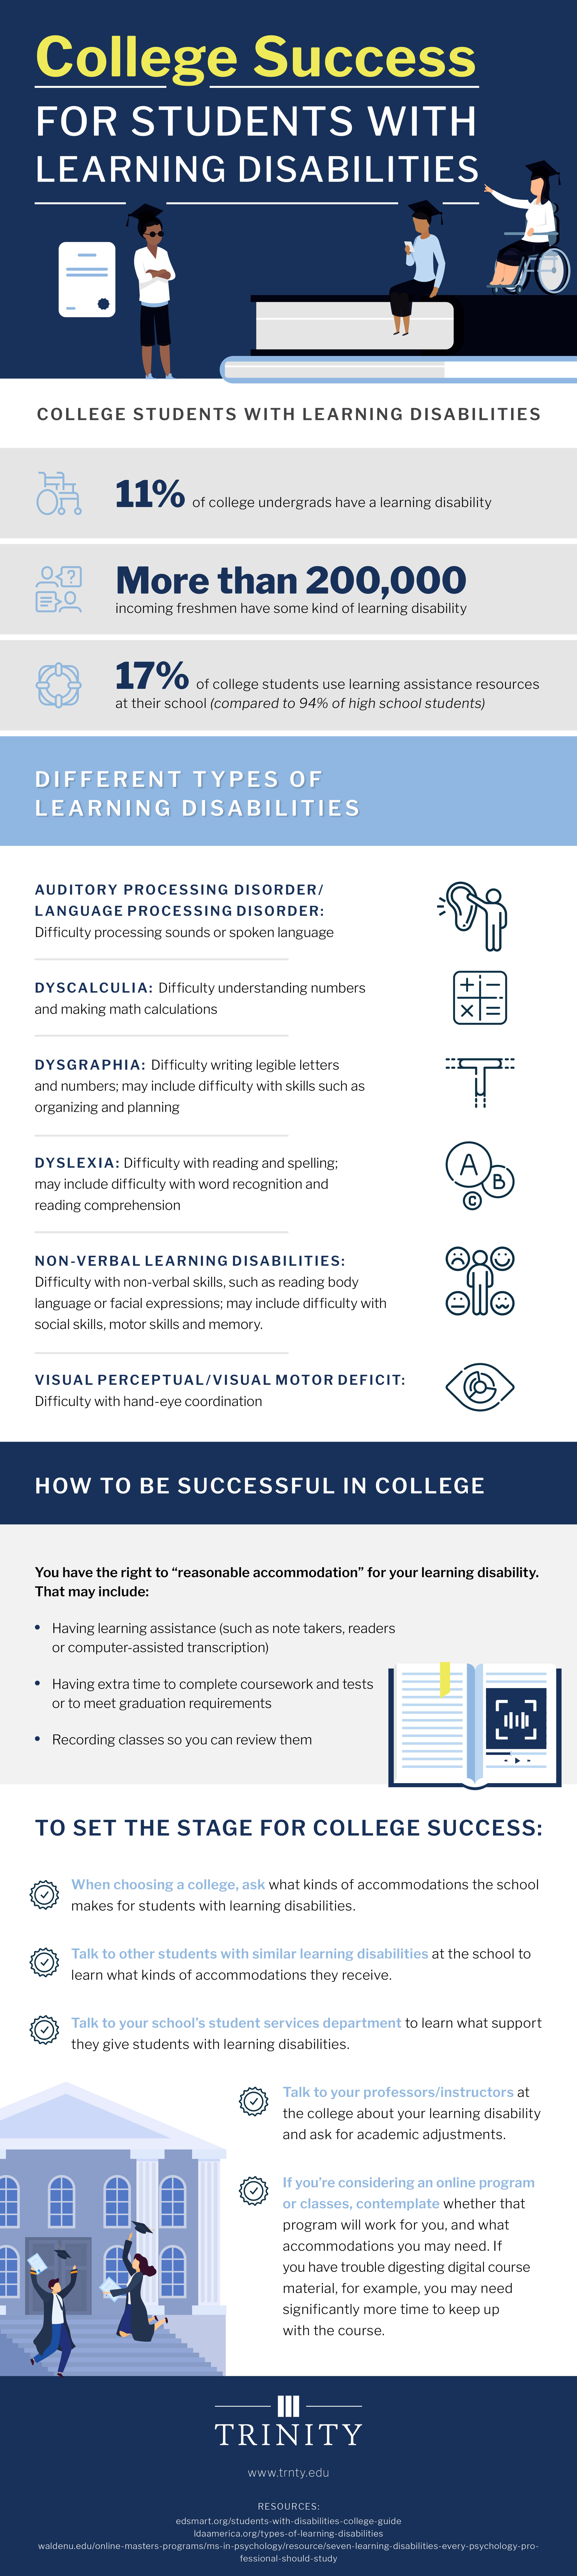 Trinity College made infographic